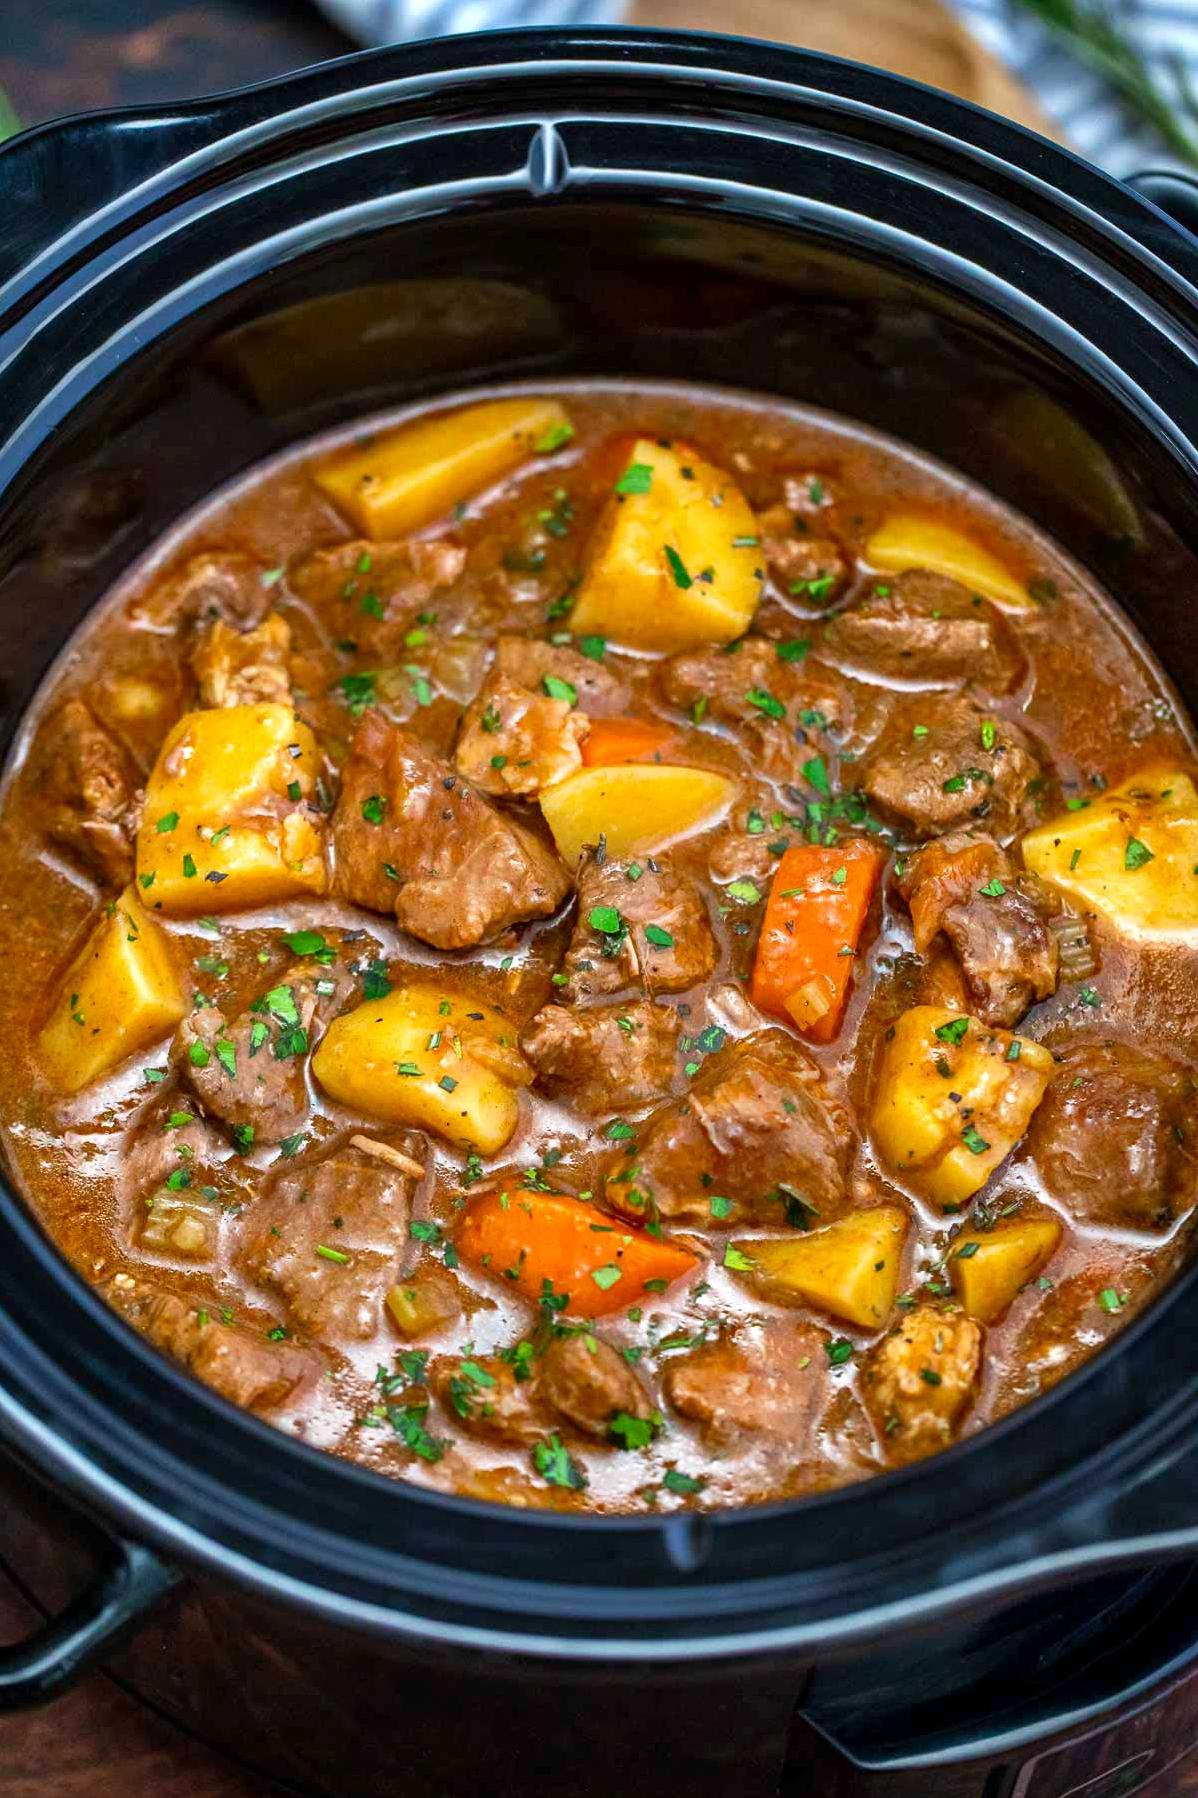  The aroma of this stew cooking is sure to make everyone's mouth water.